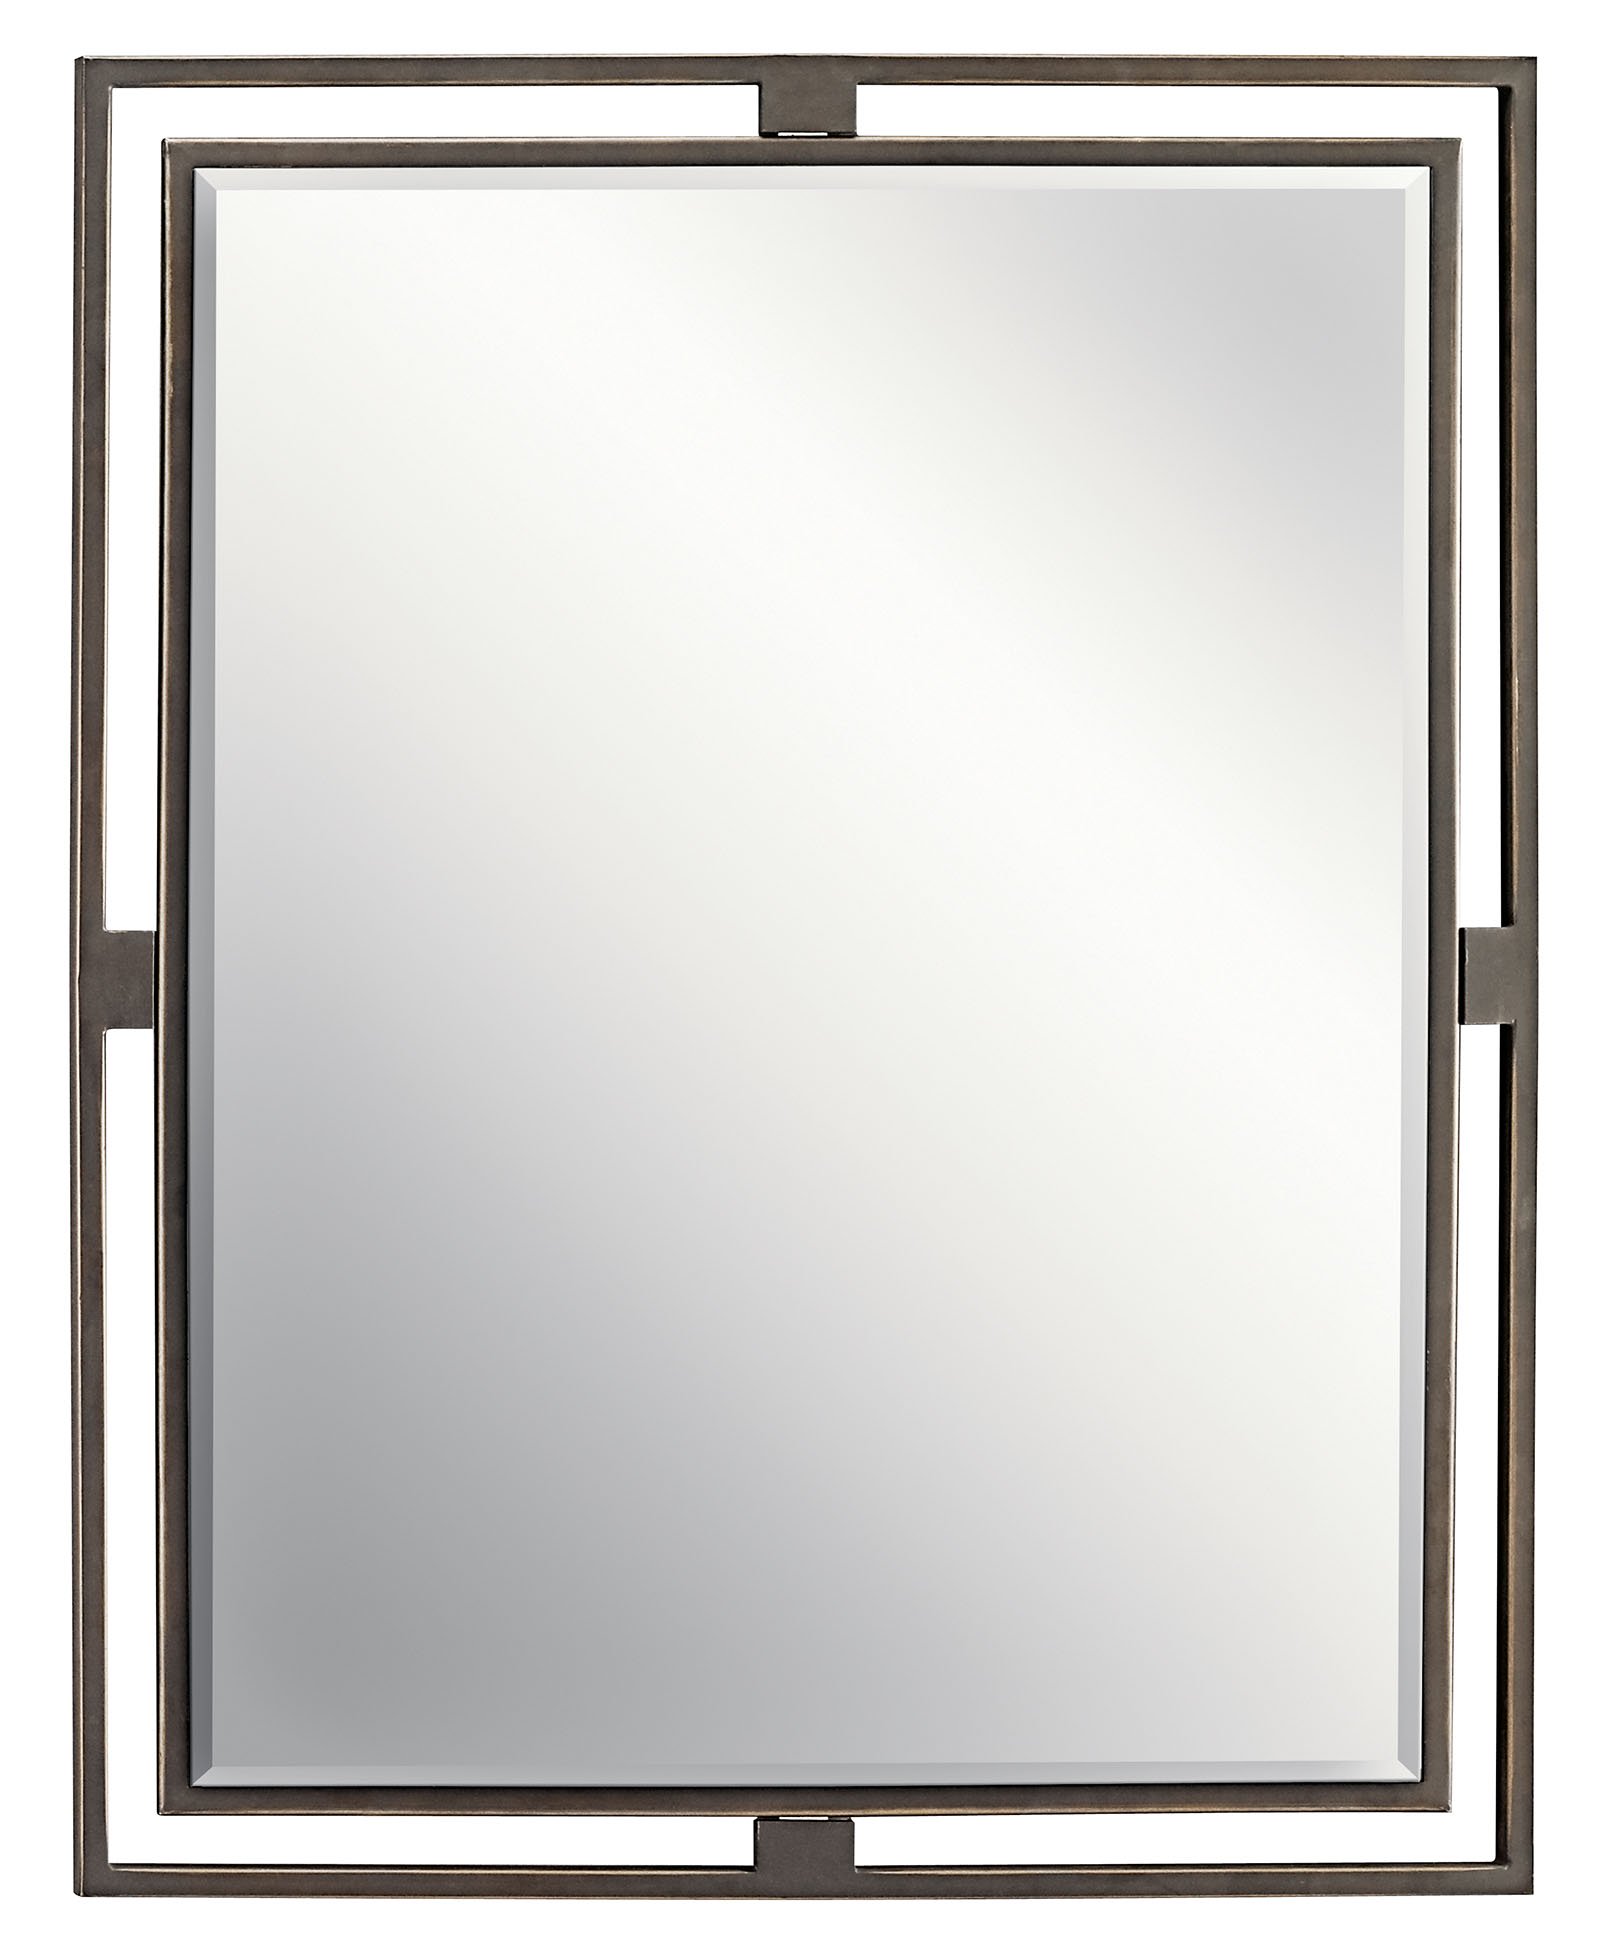 Named after renowned Dutch architect, Hendrik Berlage, this elegant mirror from the Hendrik(TM) collection is a gorgeous fixture that honors the man who was regarded by many as the in.Father of Modern architecturein.?. Classic lines are enhanced with a Olde Bronze finish, so this piece will highlight any space in your home.